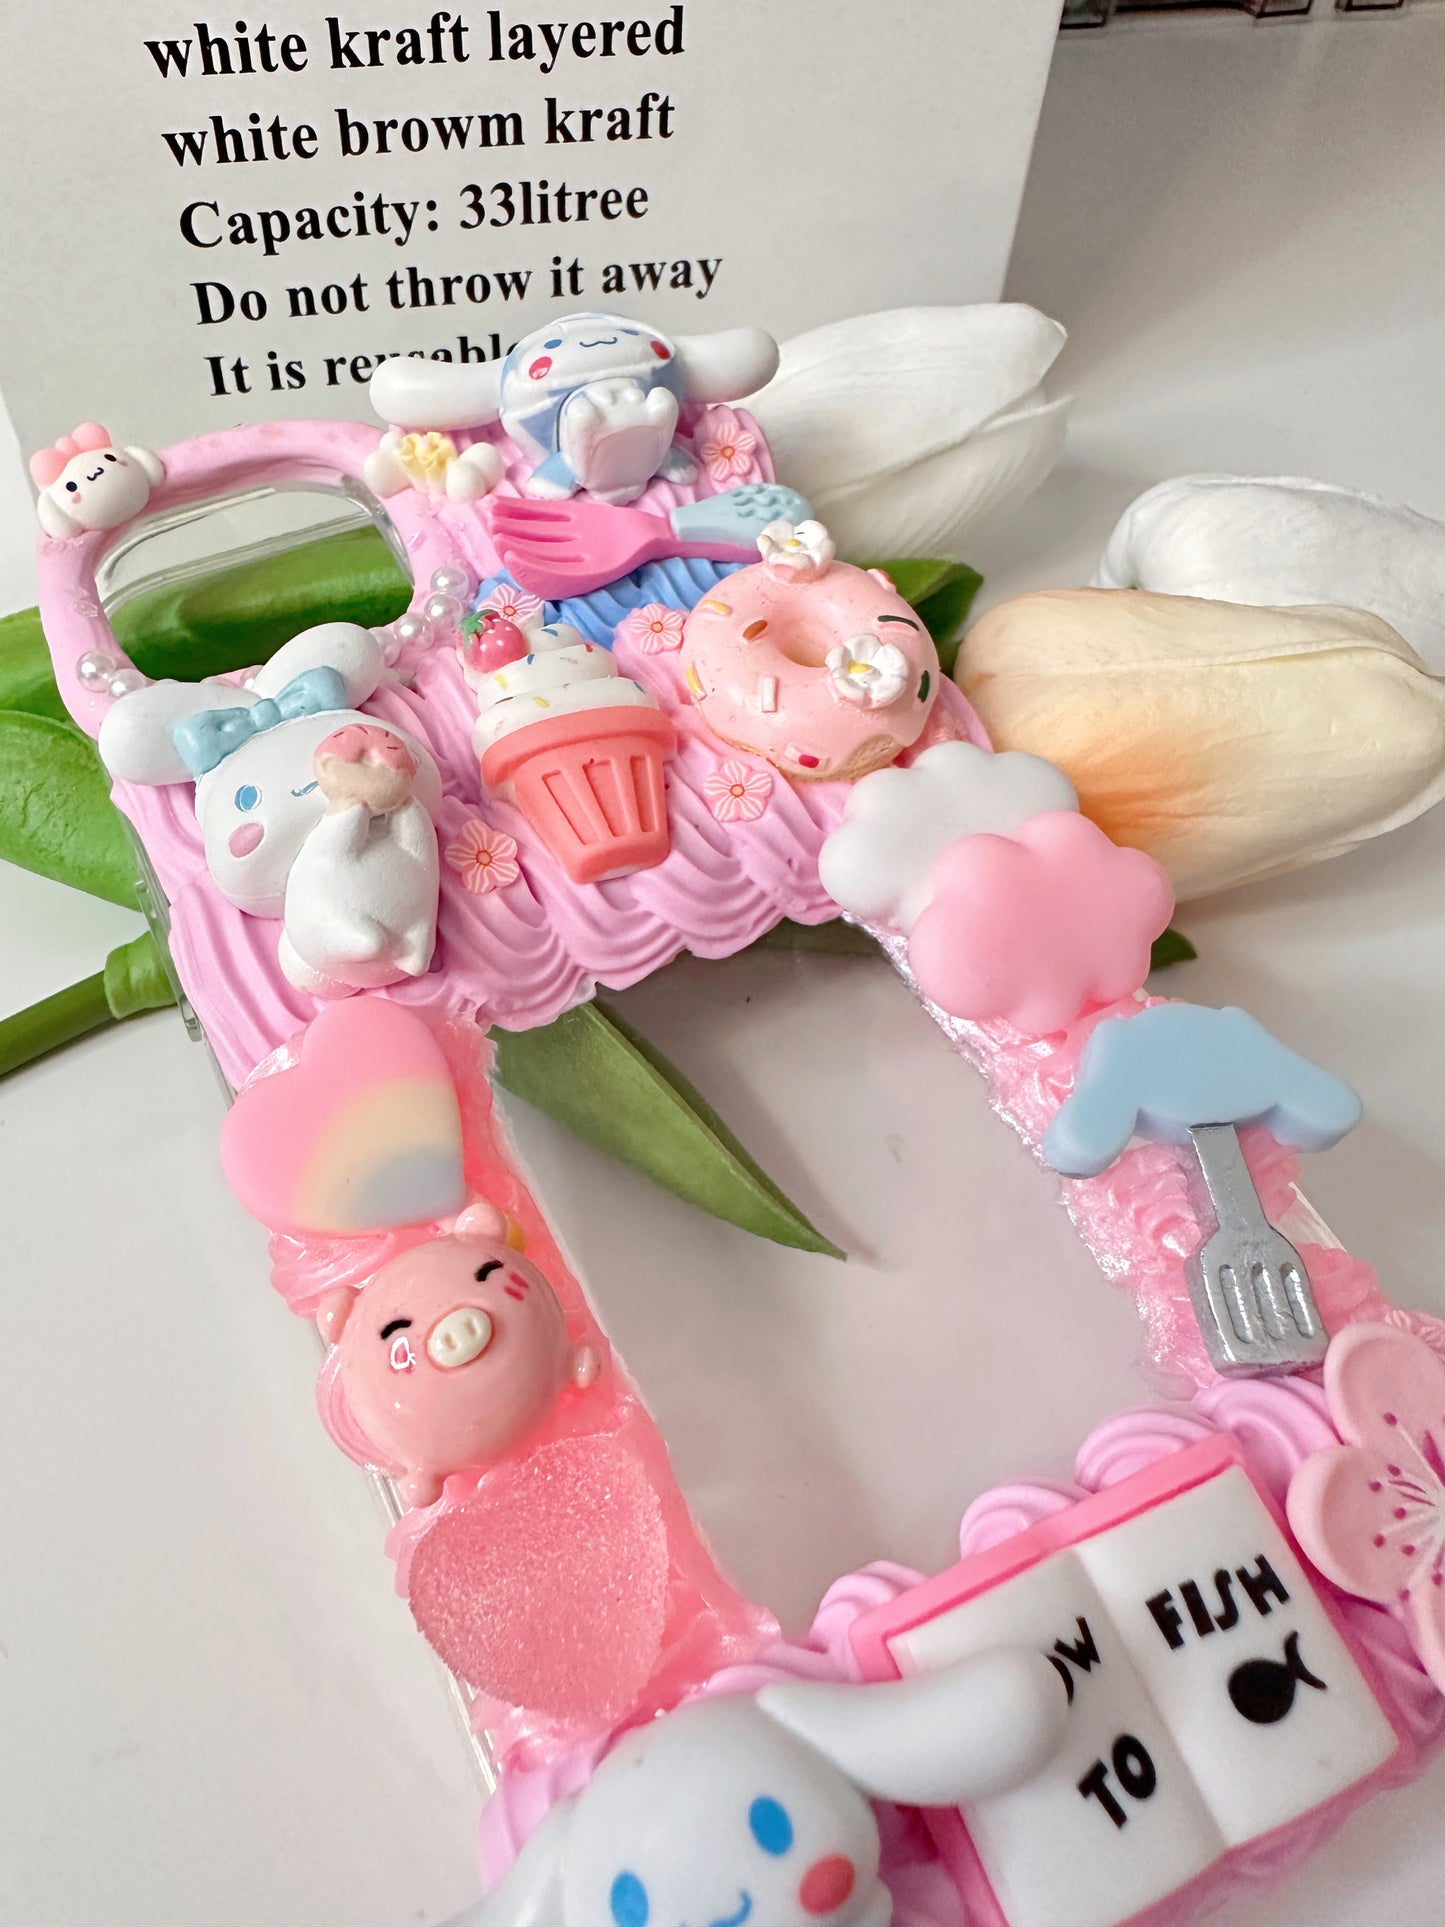 Themed Pink Rabbits Custom Decoden Phone Cases, whipped cream phone cases, Personalized Case, can put photo inside,decoden case,decoden charms,Put your favorite idol's picture